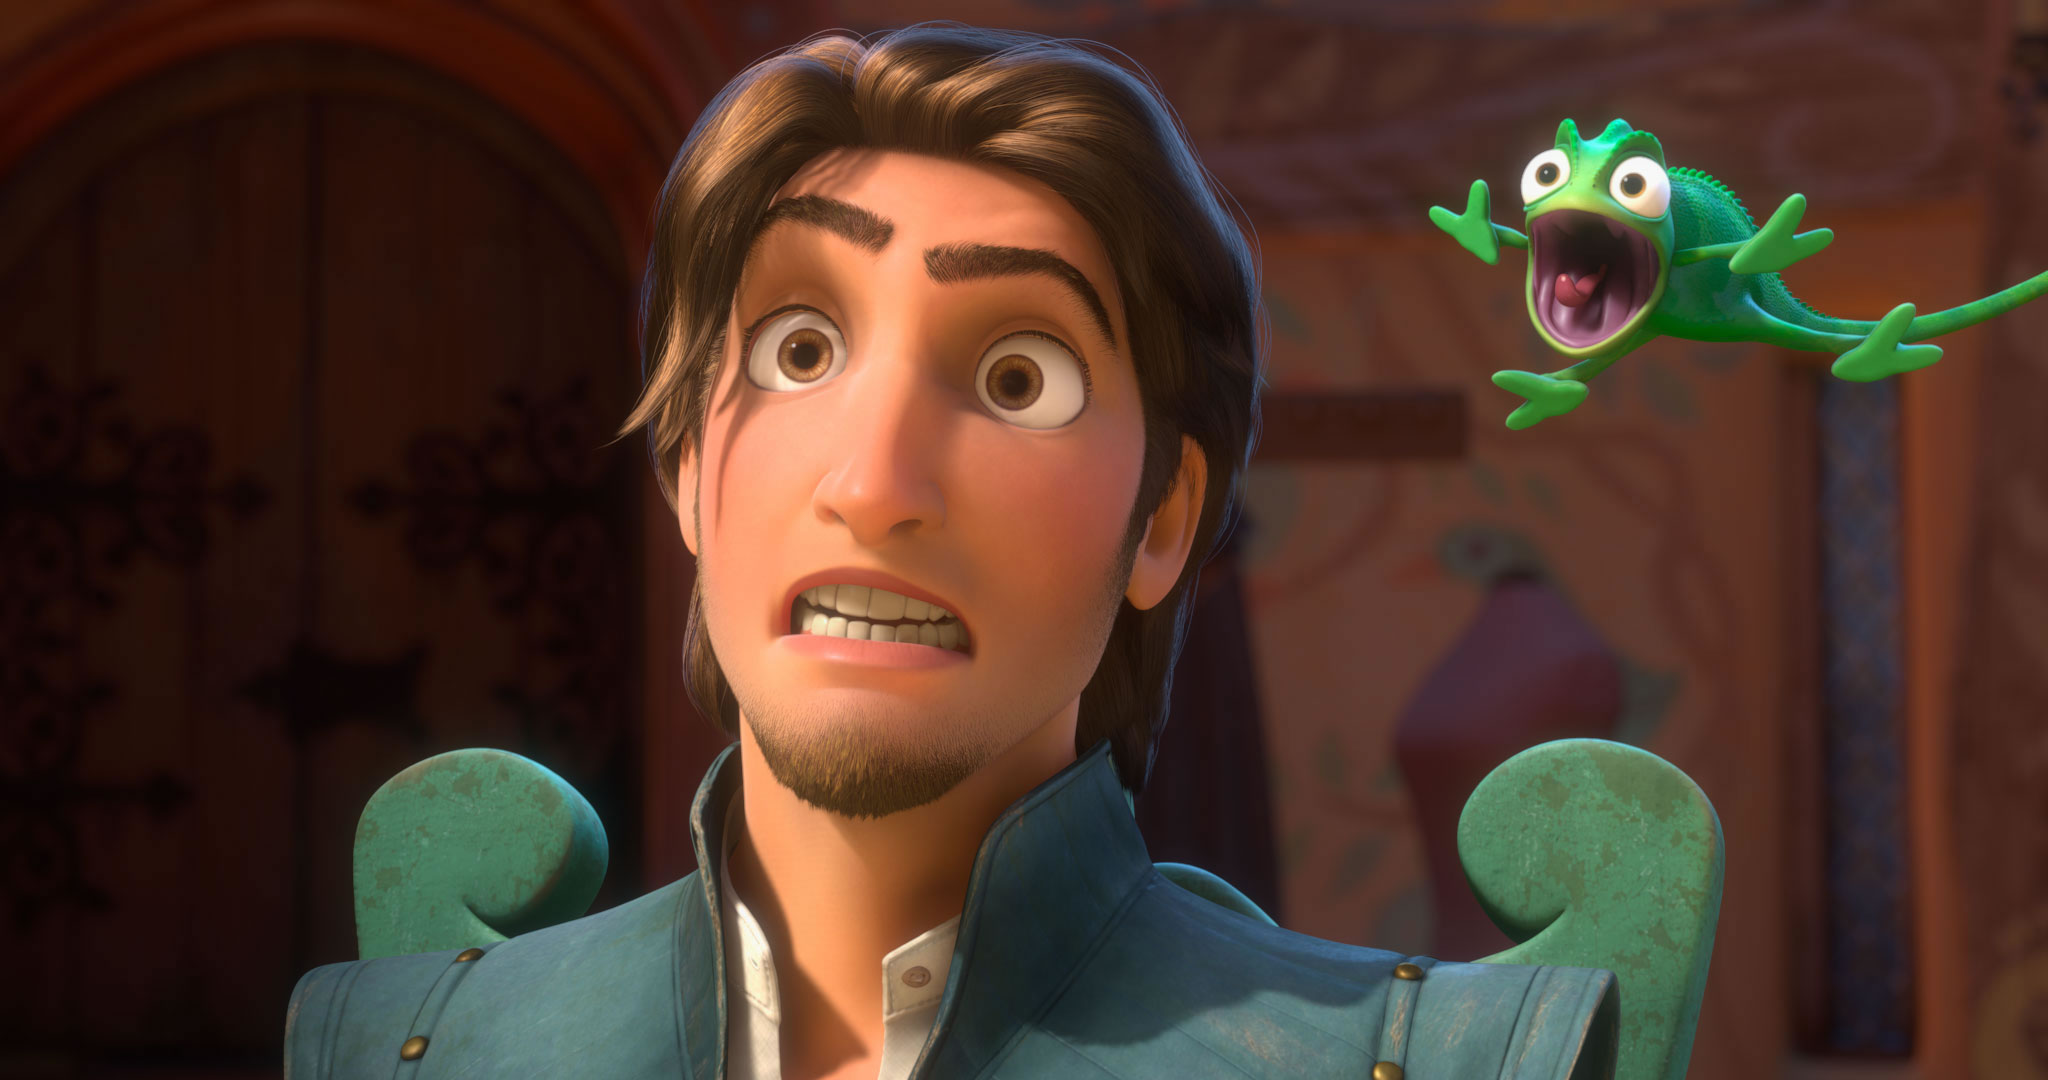 Over 40 Images from Walt Disney's TANGLED | Collider